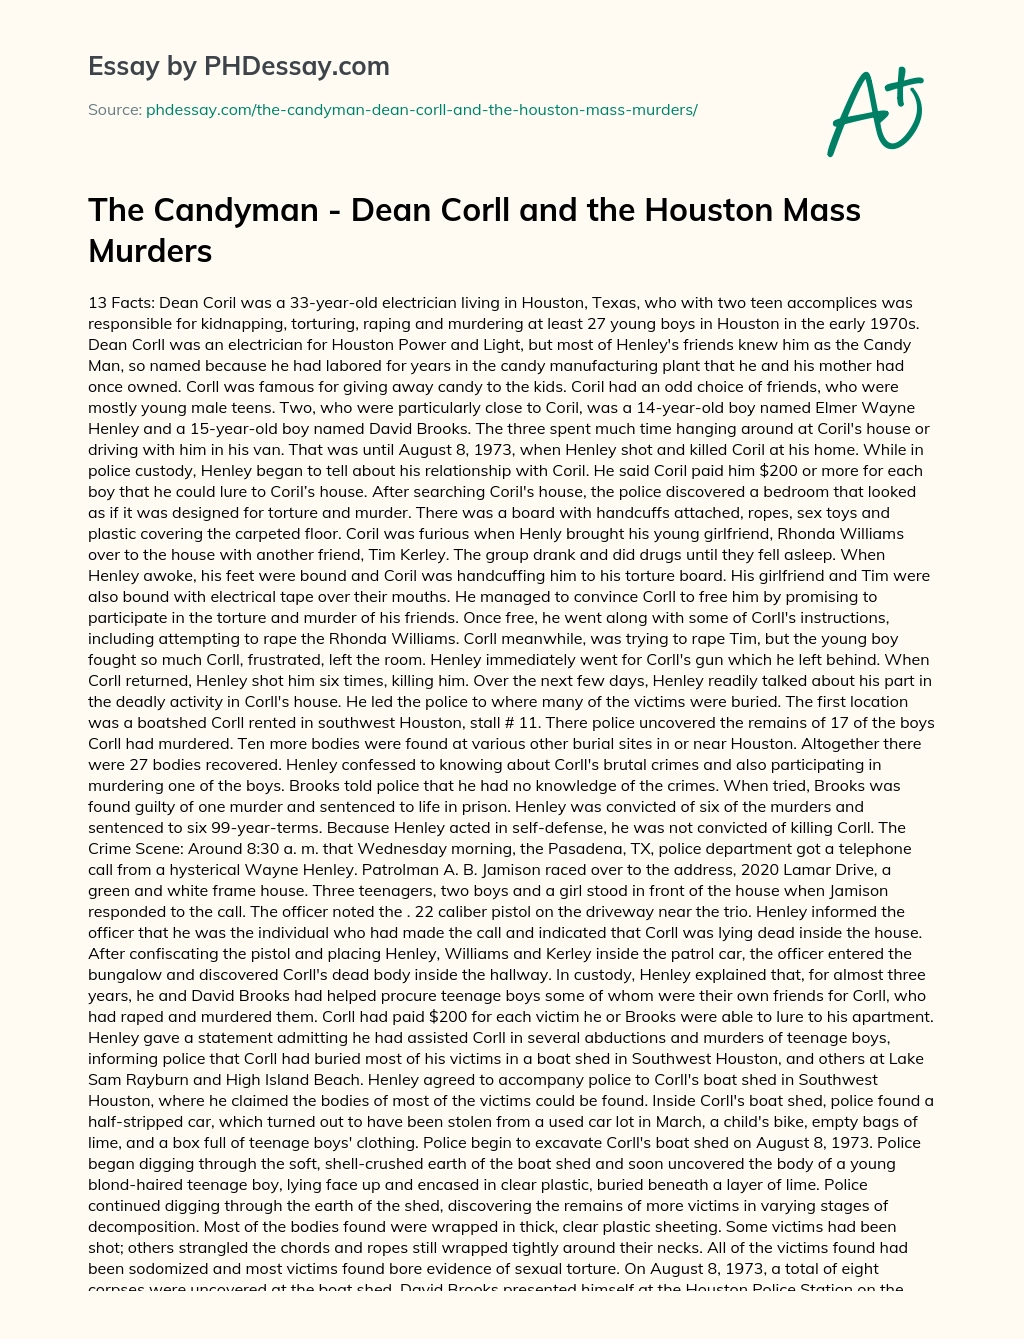 The Candyman – Dean Corll and the Houston Mass Murders essay